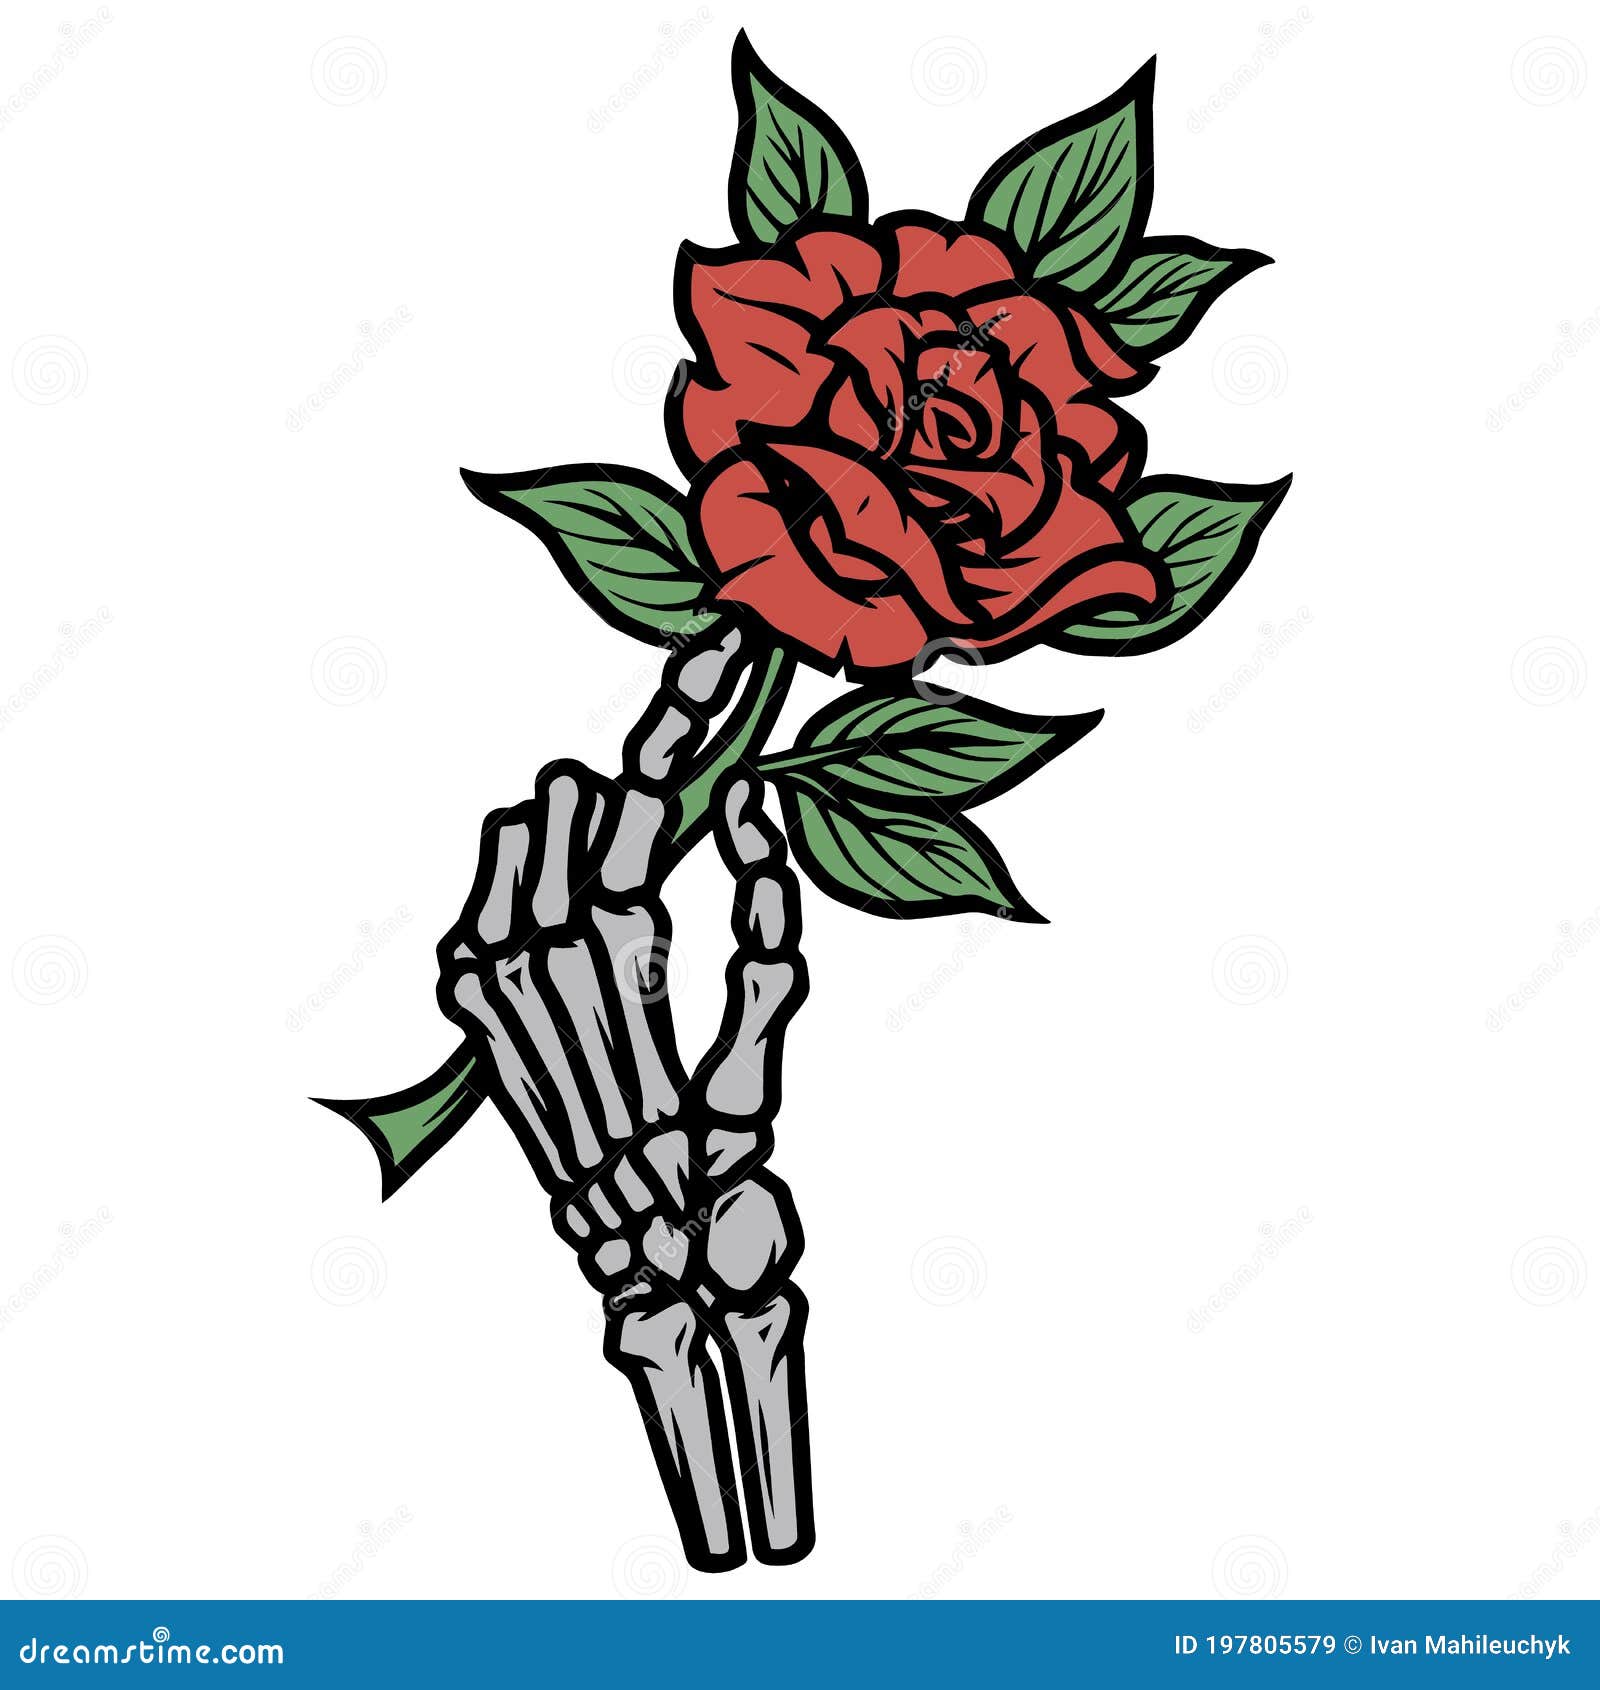 Skeleton surrounded by purple roses and red peonies